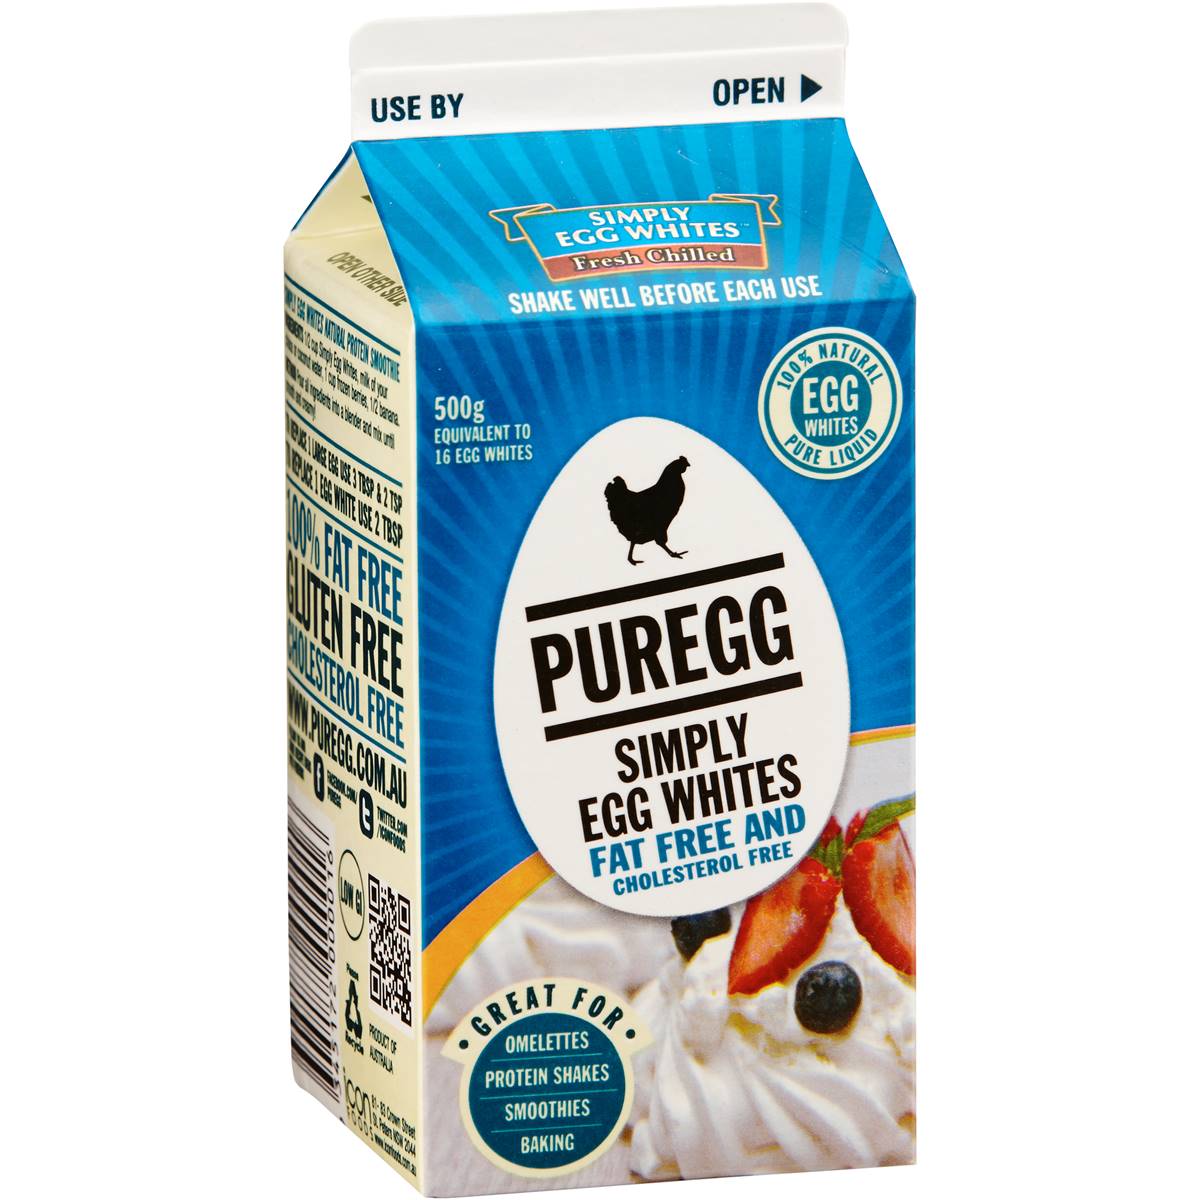 Calories in Puregg Simply Egg Whites